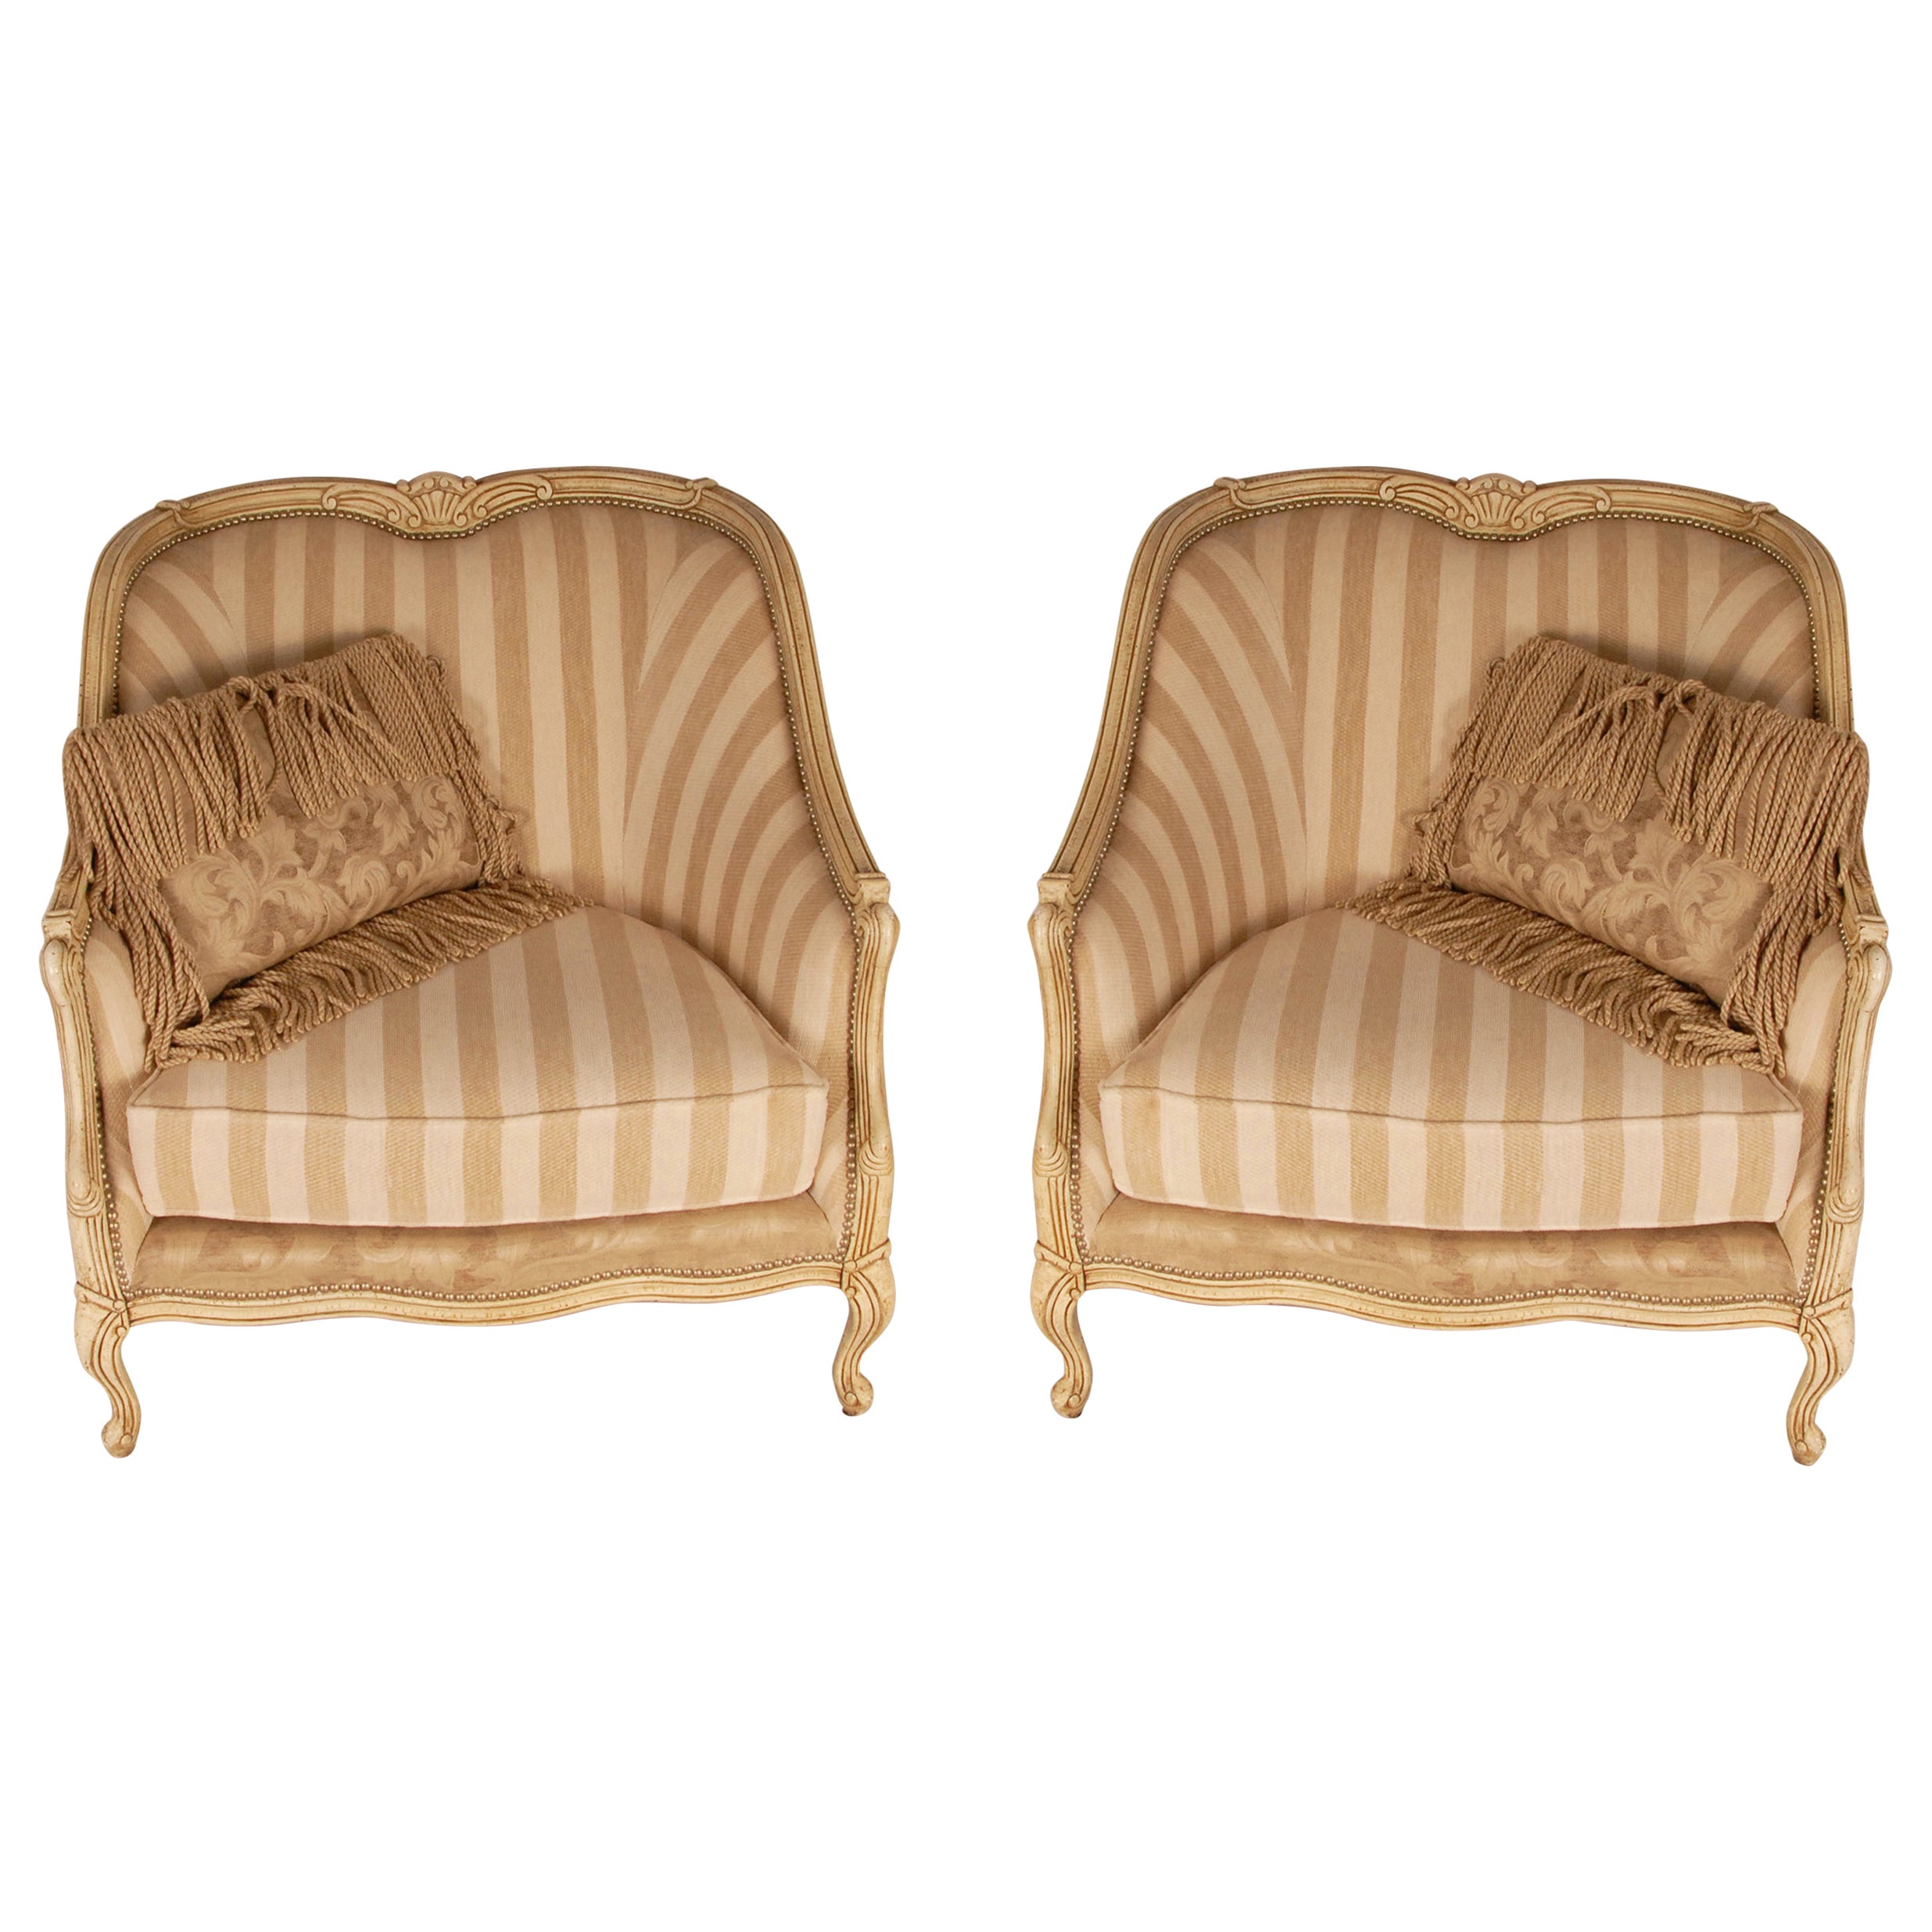 French Country Henredon Beacon Hill Oversized Bergere Chairs Armchairs a Pair